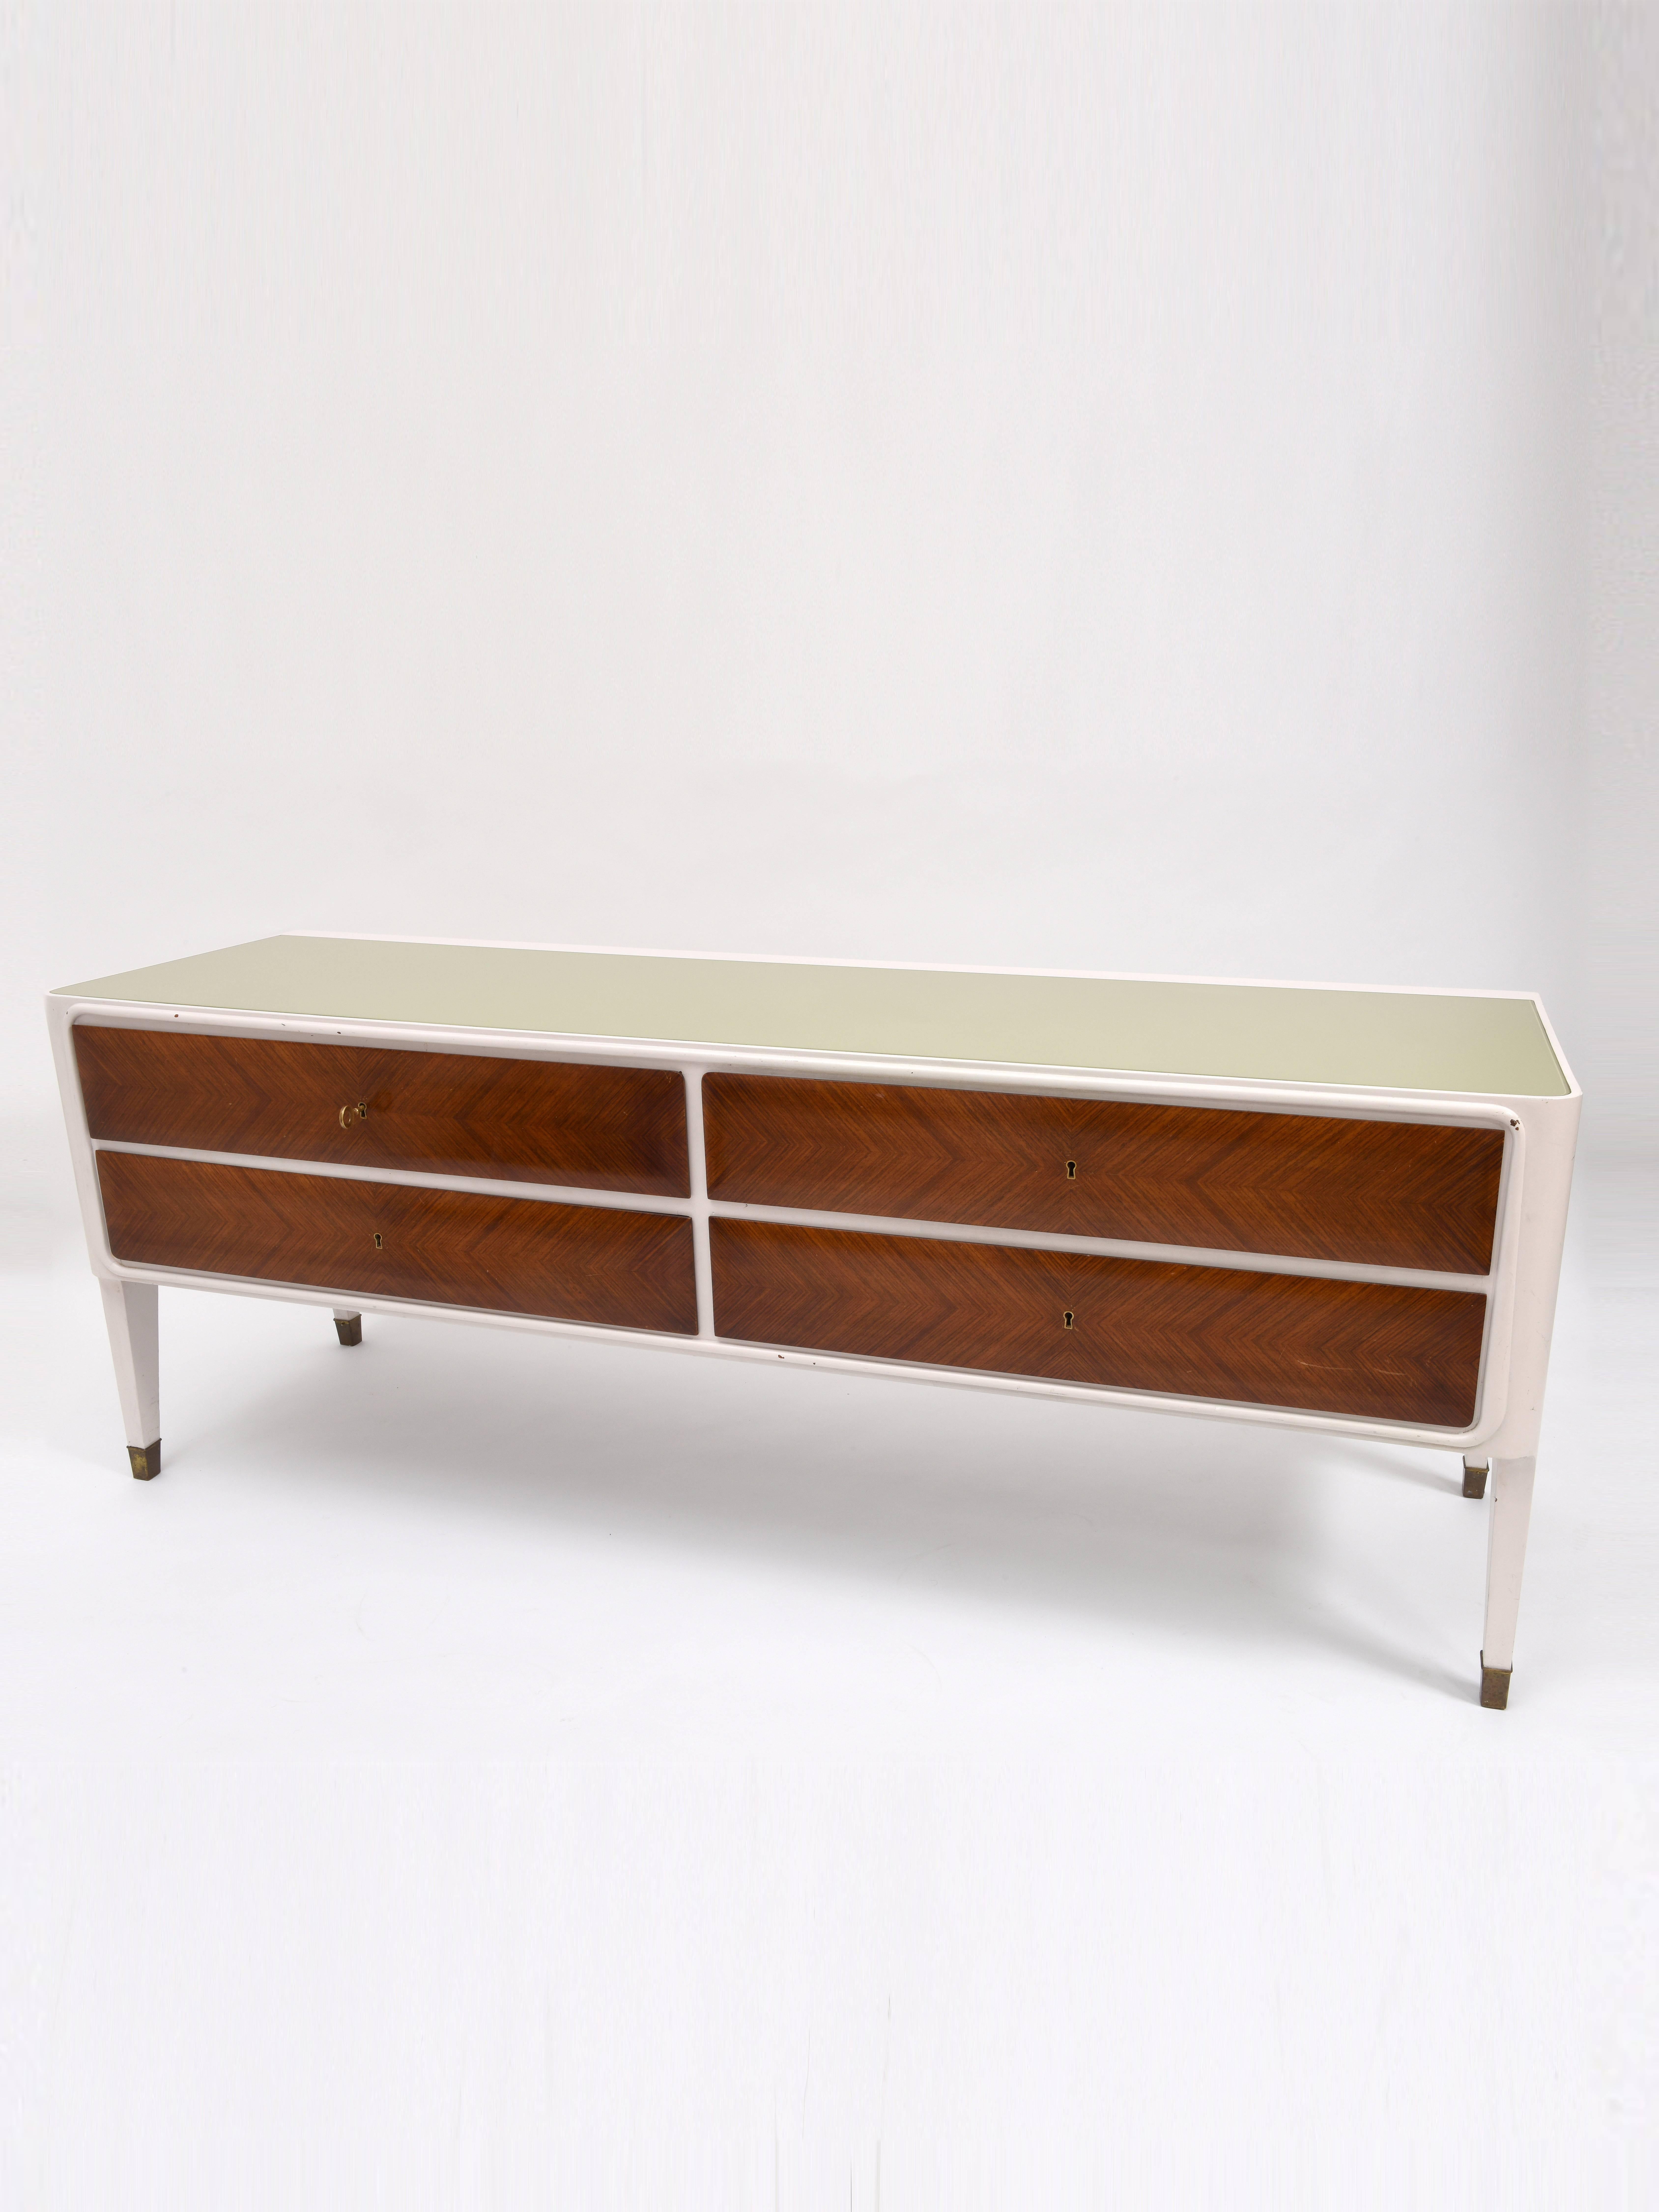 Italian Credenza Sideboard In Fair Condition For Sale In London, GB